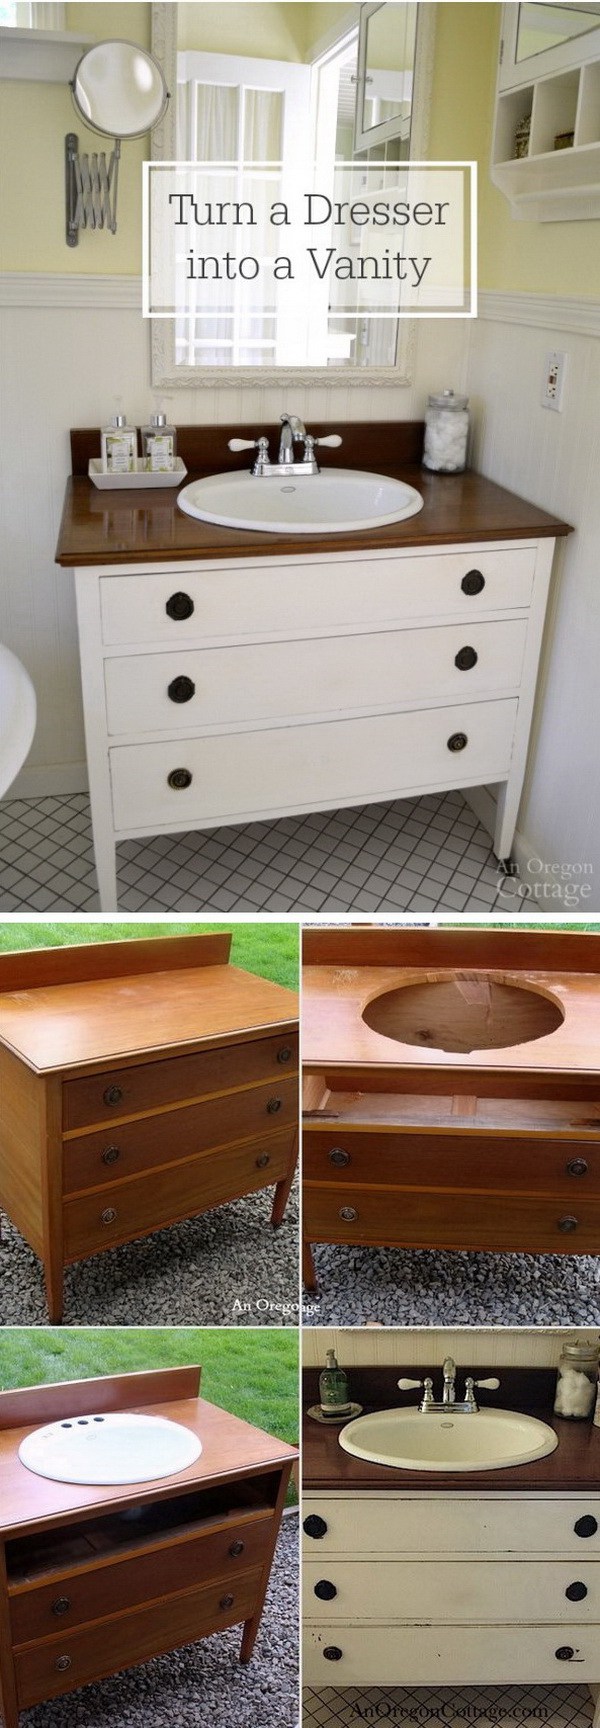 DIY Bathroom Vanity with Drawers for Storage: Get an old table from your garage or at a flea market, trace the sink hole, lay a sink in the opening...now you have this stylish and useful vanity for your bathroom. The drawers below can be a great storage solution for your bathroom supplies or other daily supplies. 